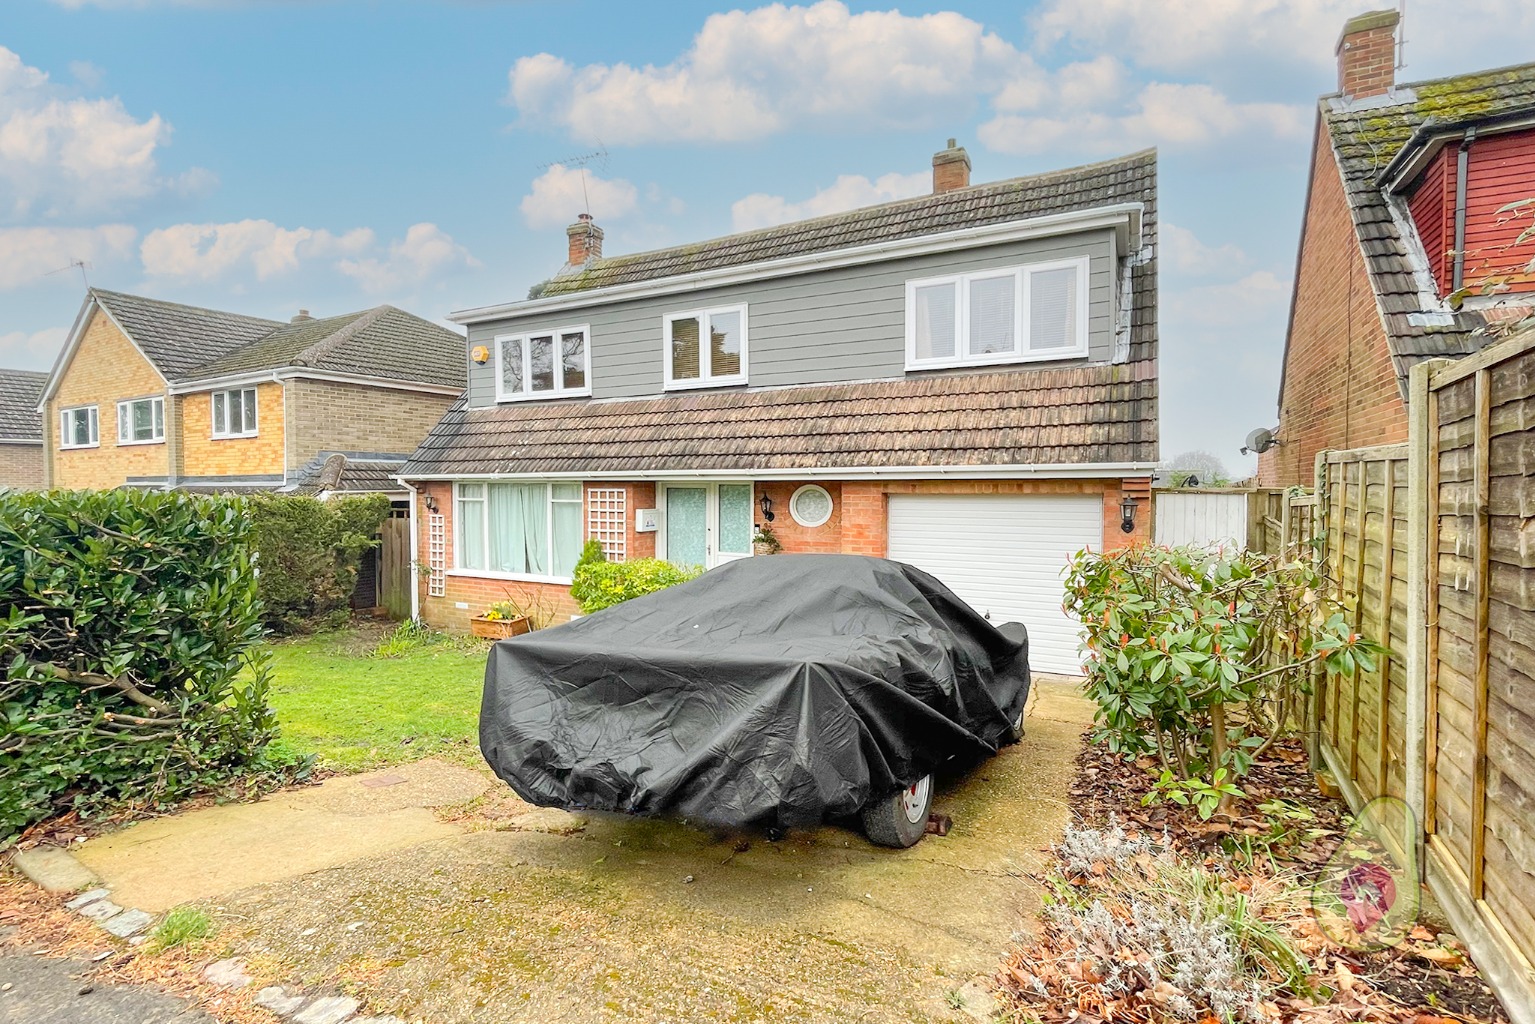 3 bed detached house for sale  - Property Image 1